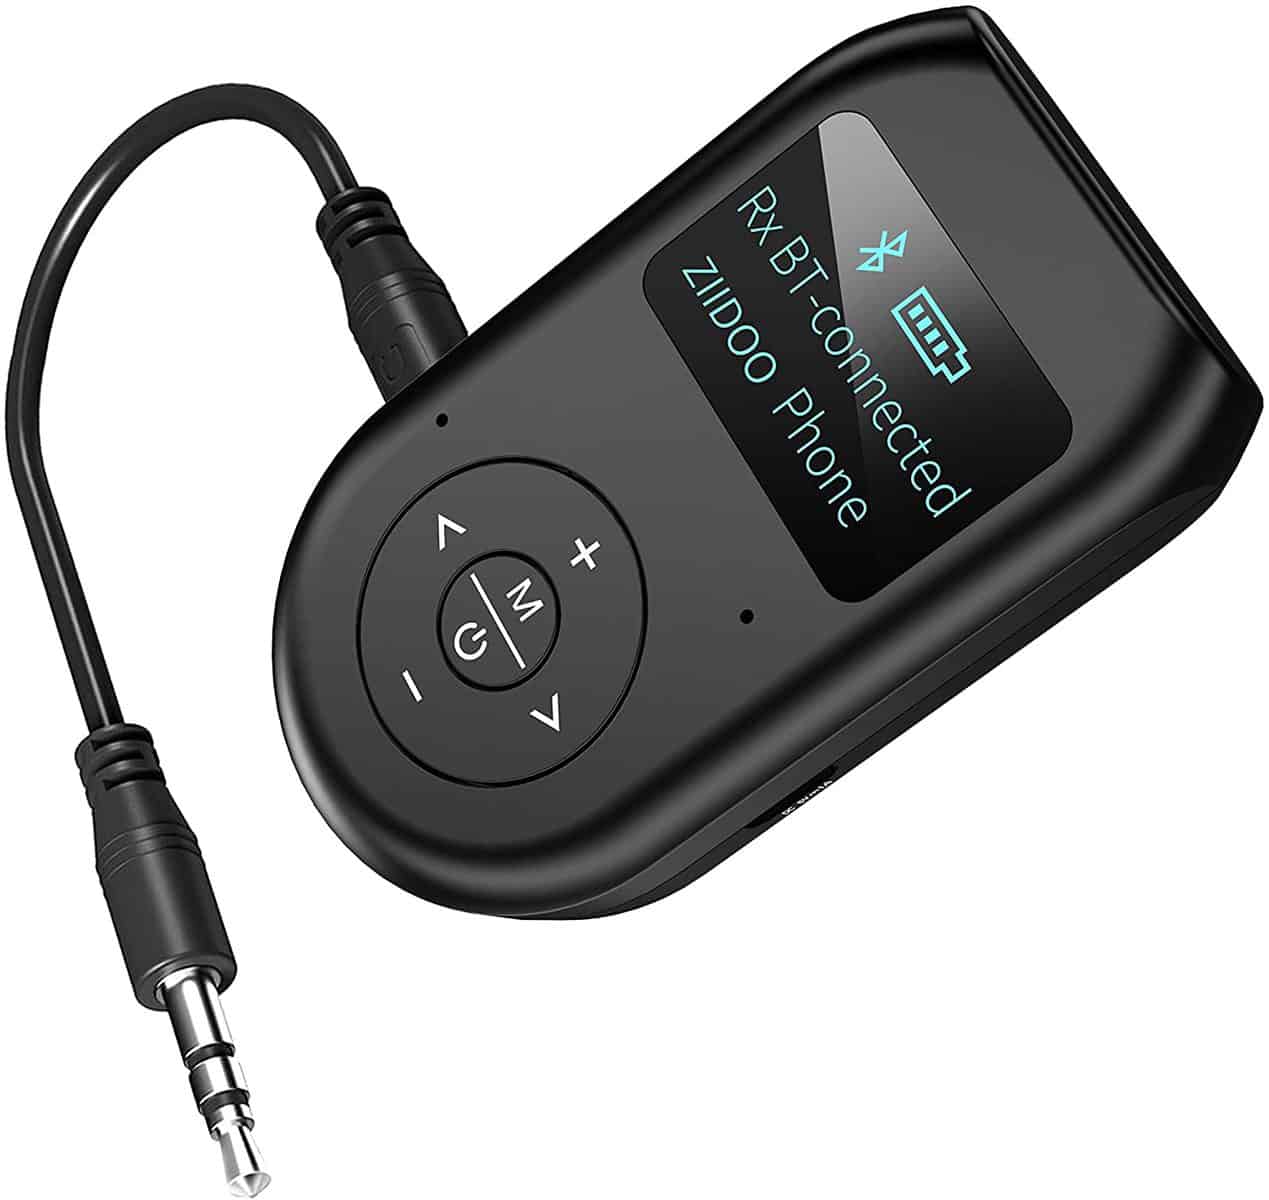 ZIIDOO Visible Bluetooth Transmitter and Receiver